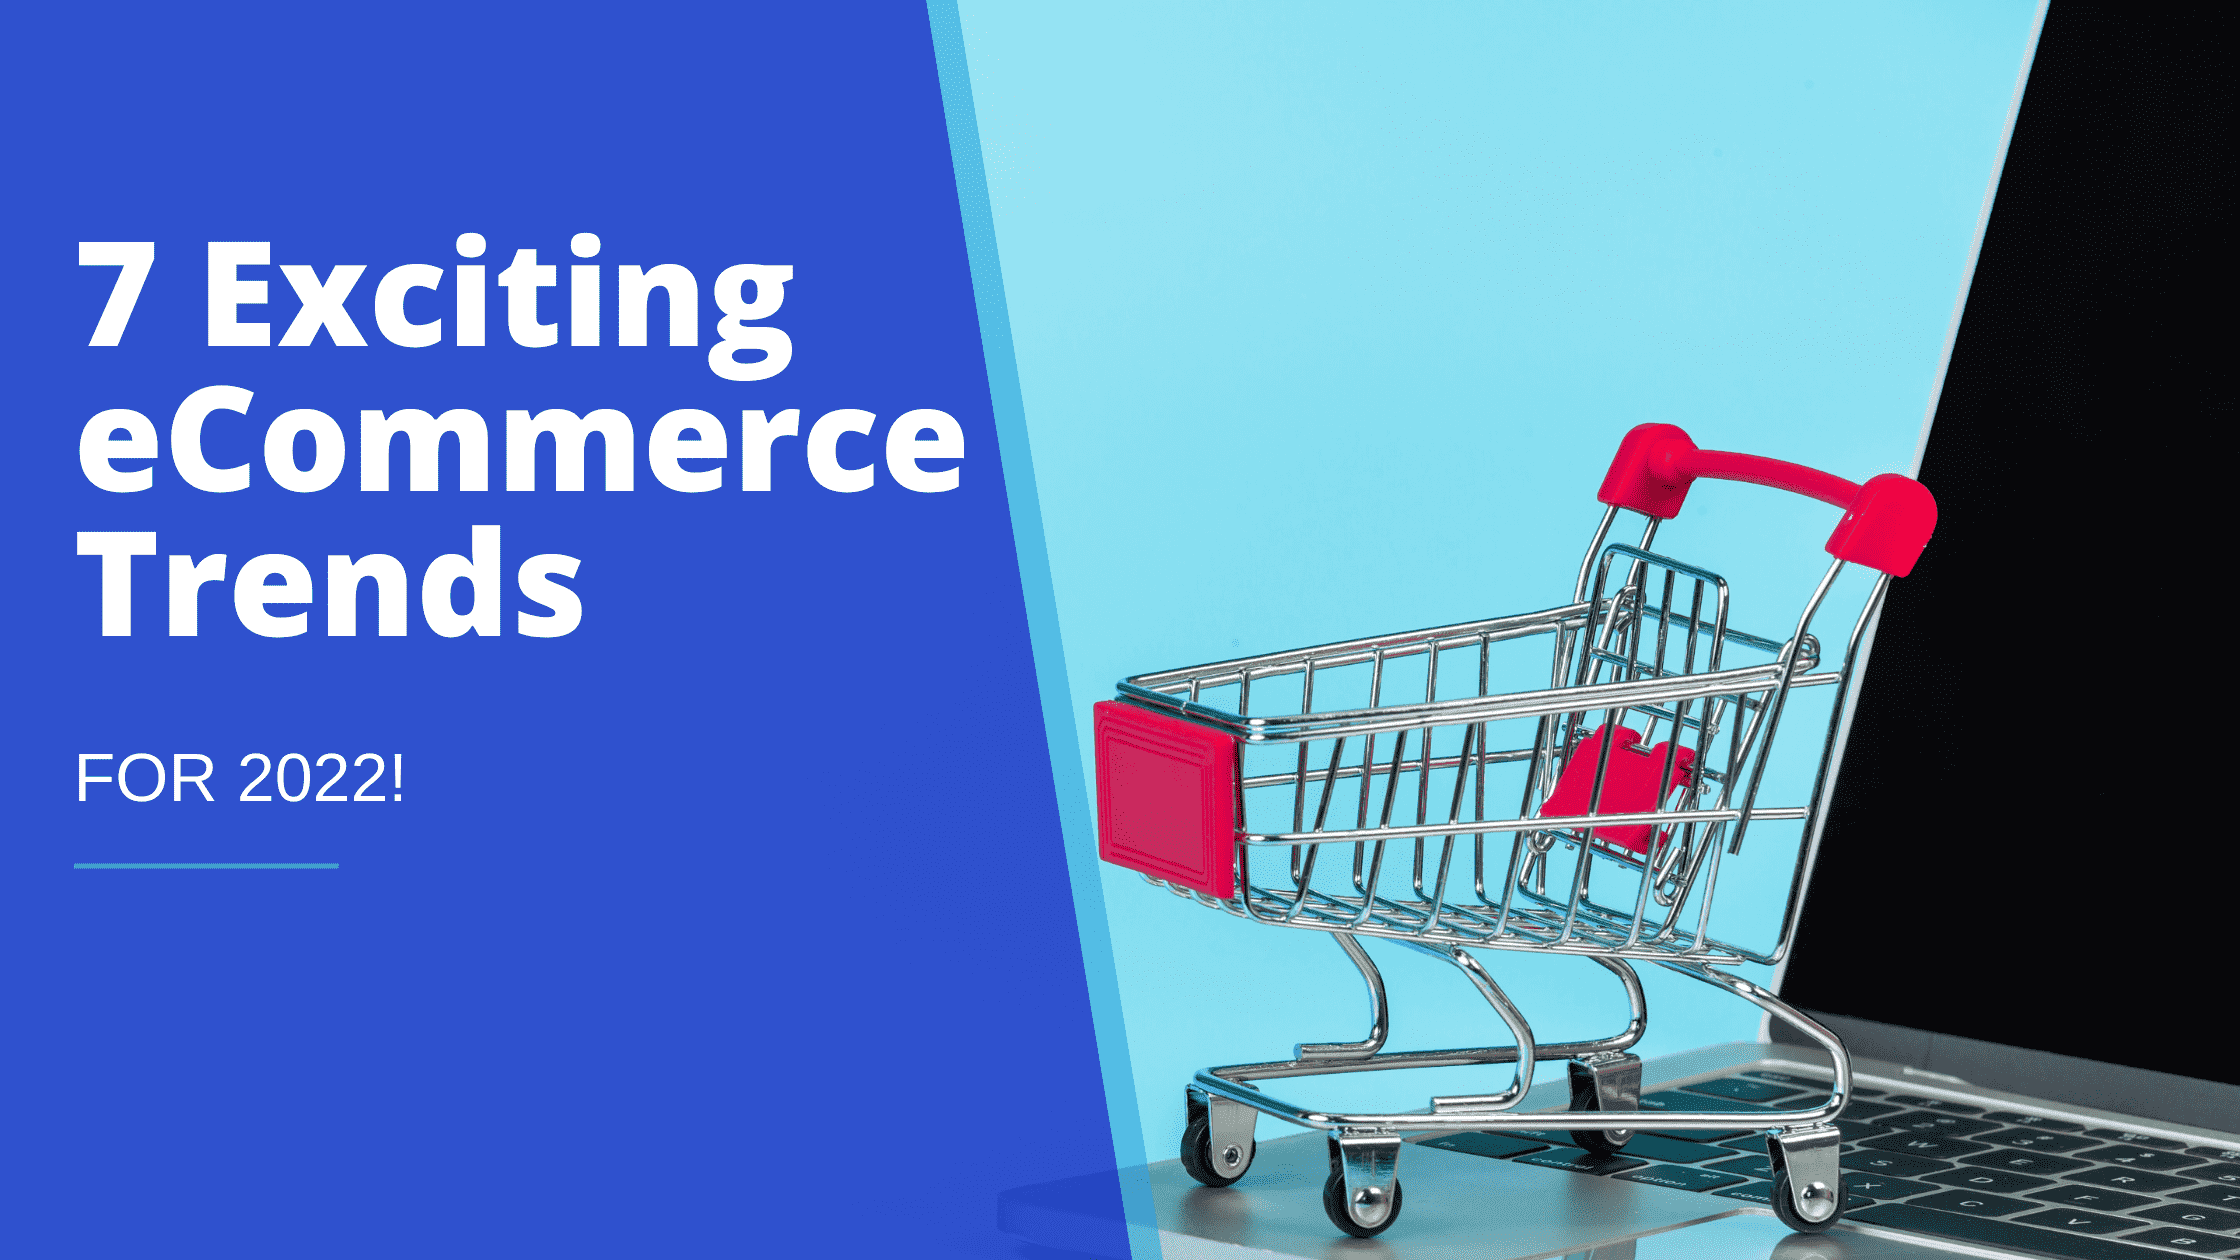 7 exciting ecommerce trends - sell more